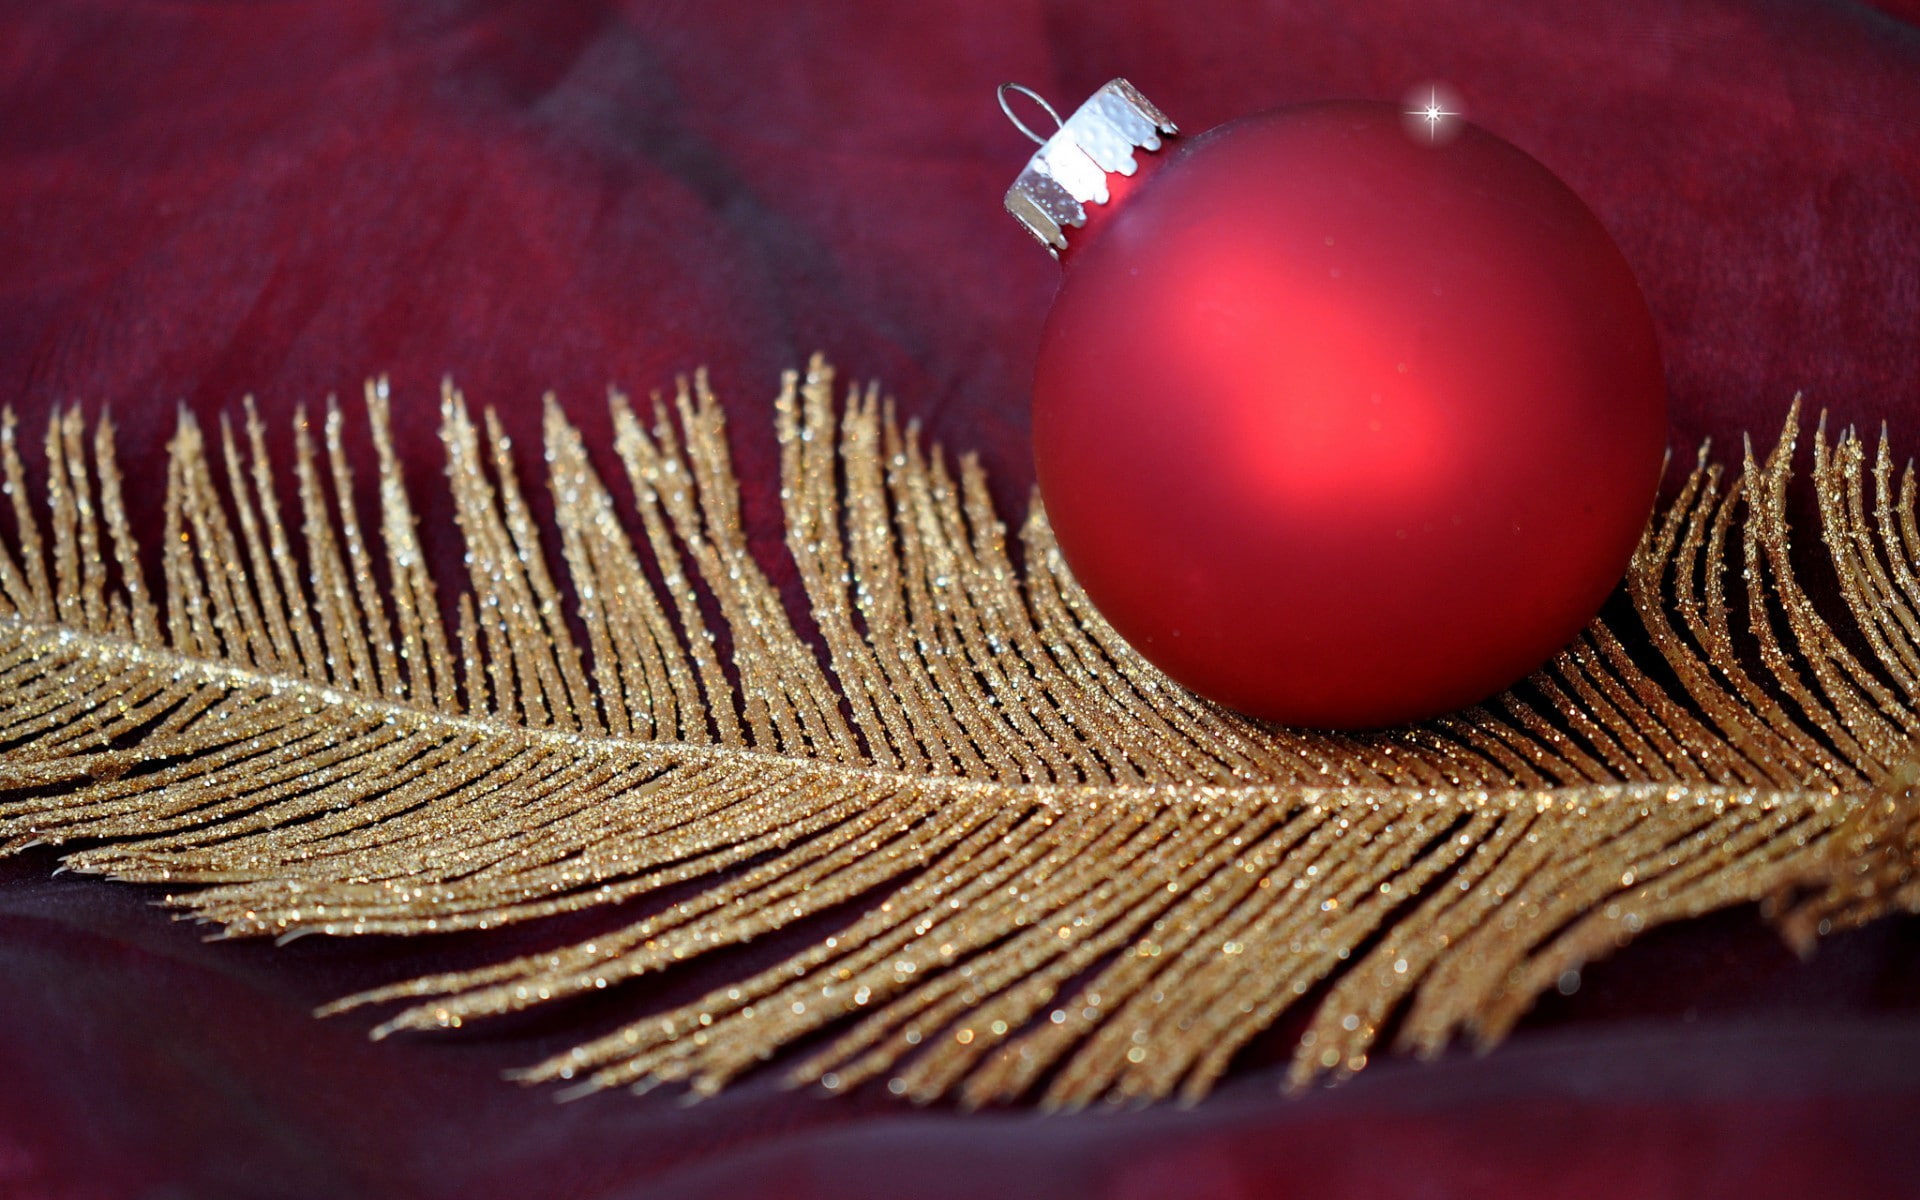 Christmas, Christmas ornaments, close-up, red, indoors, celebration